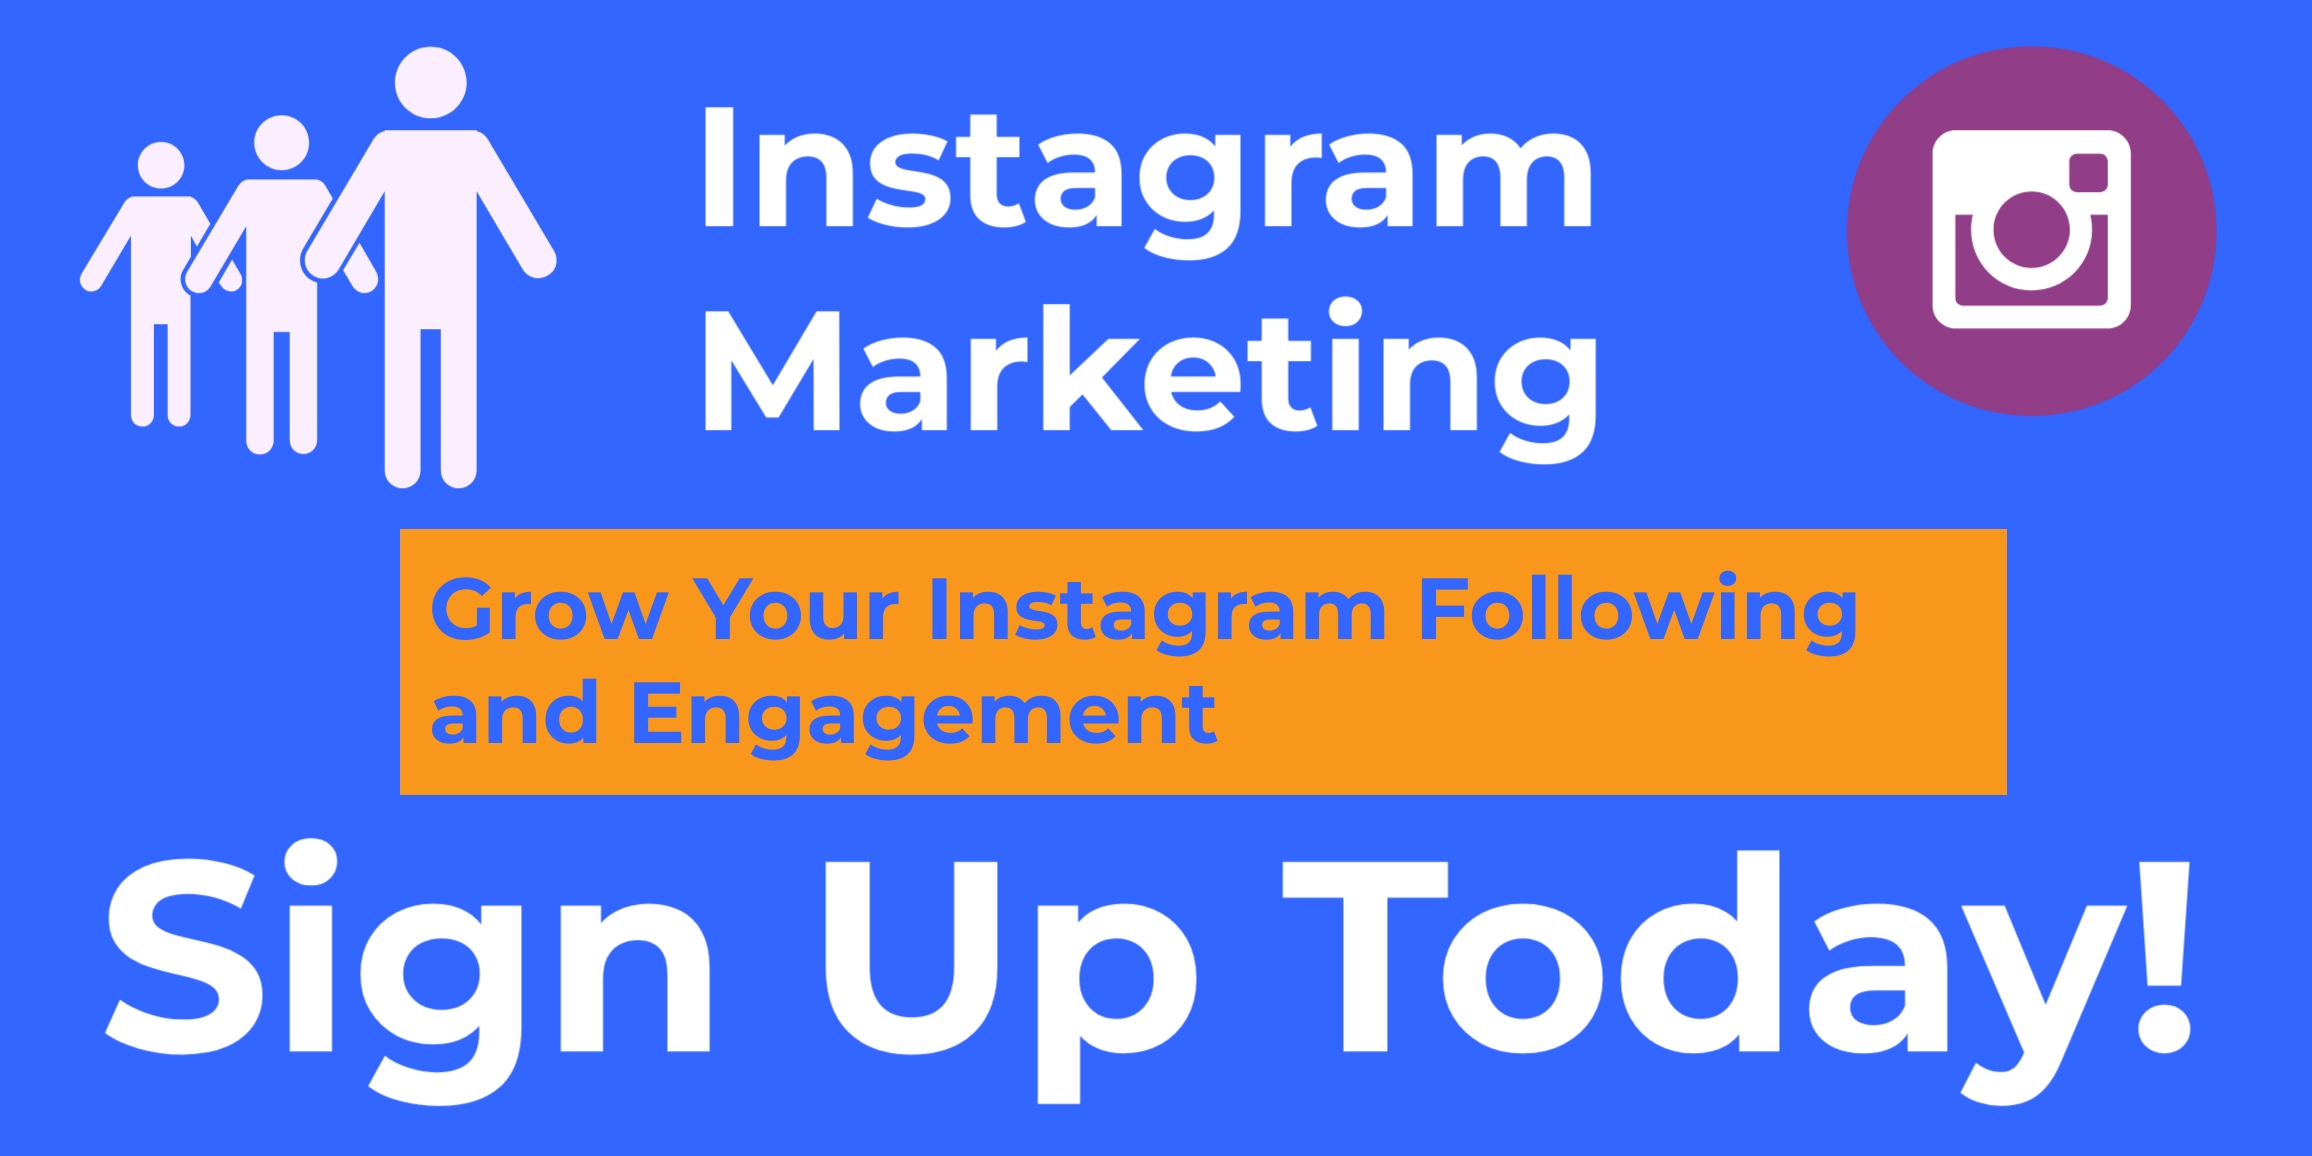 Grow Your Brand and Followers on Instagram